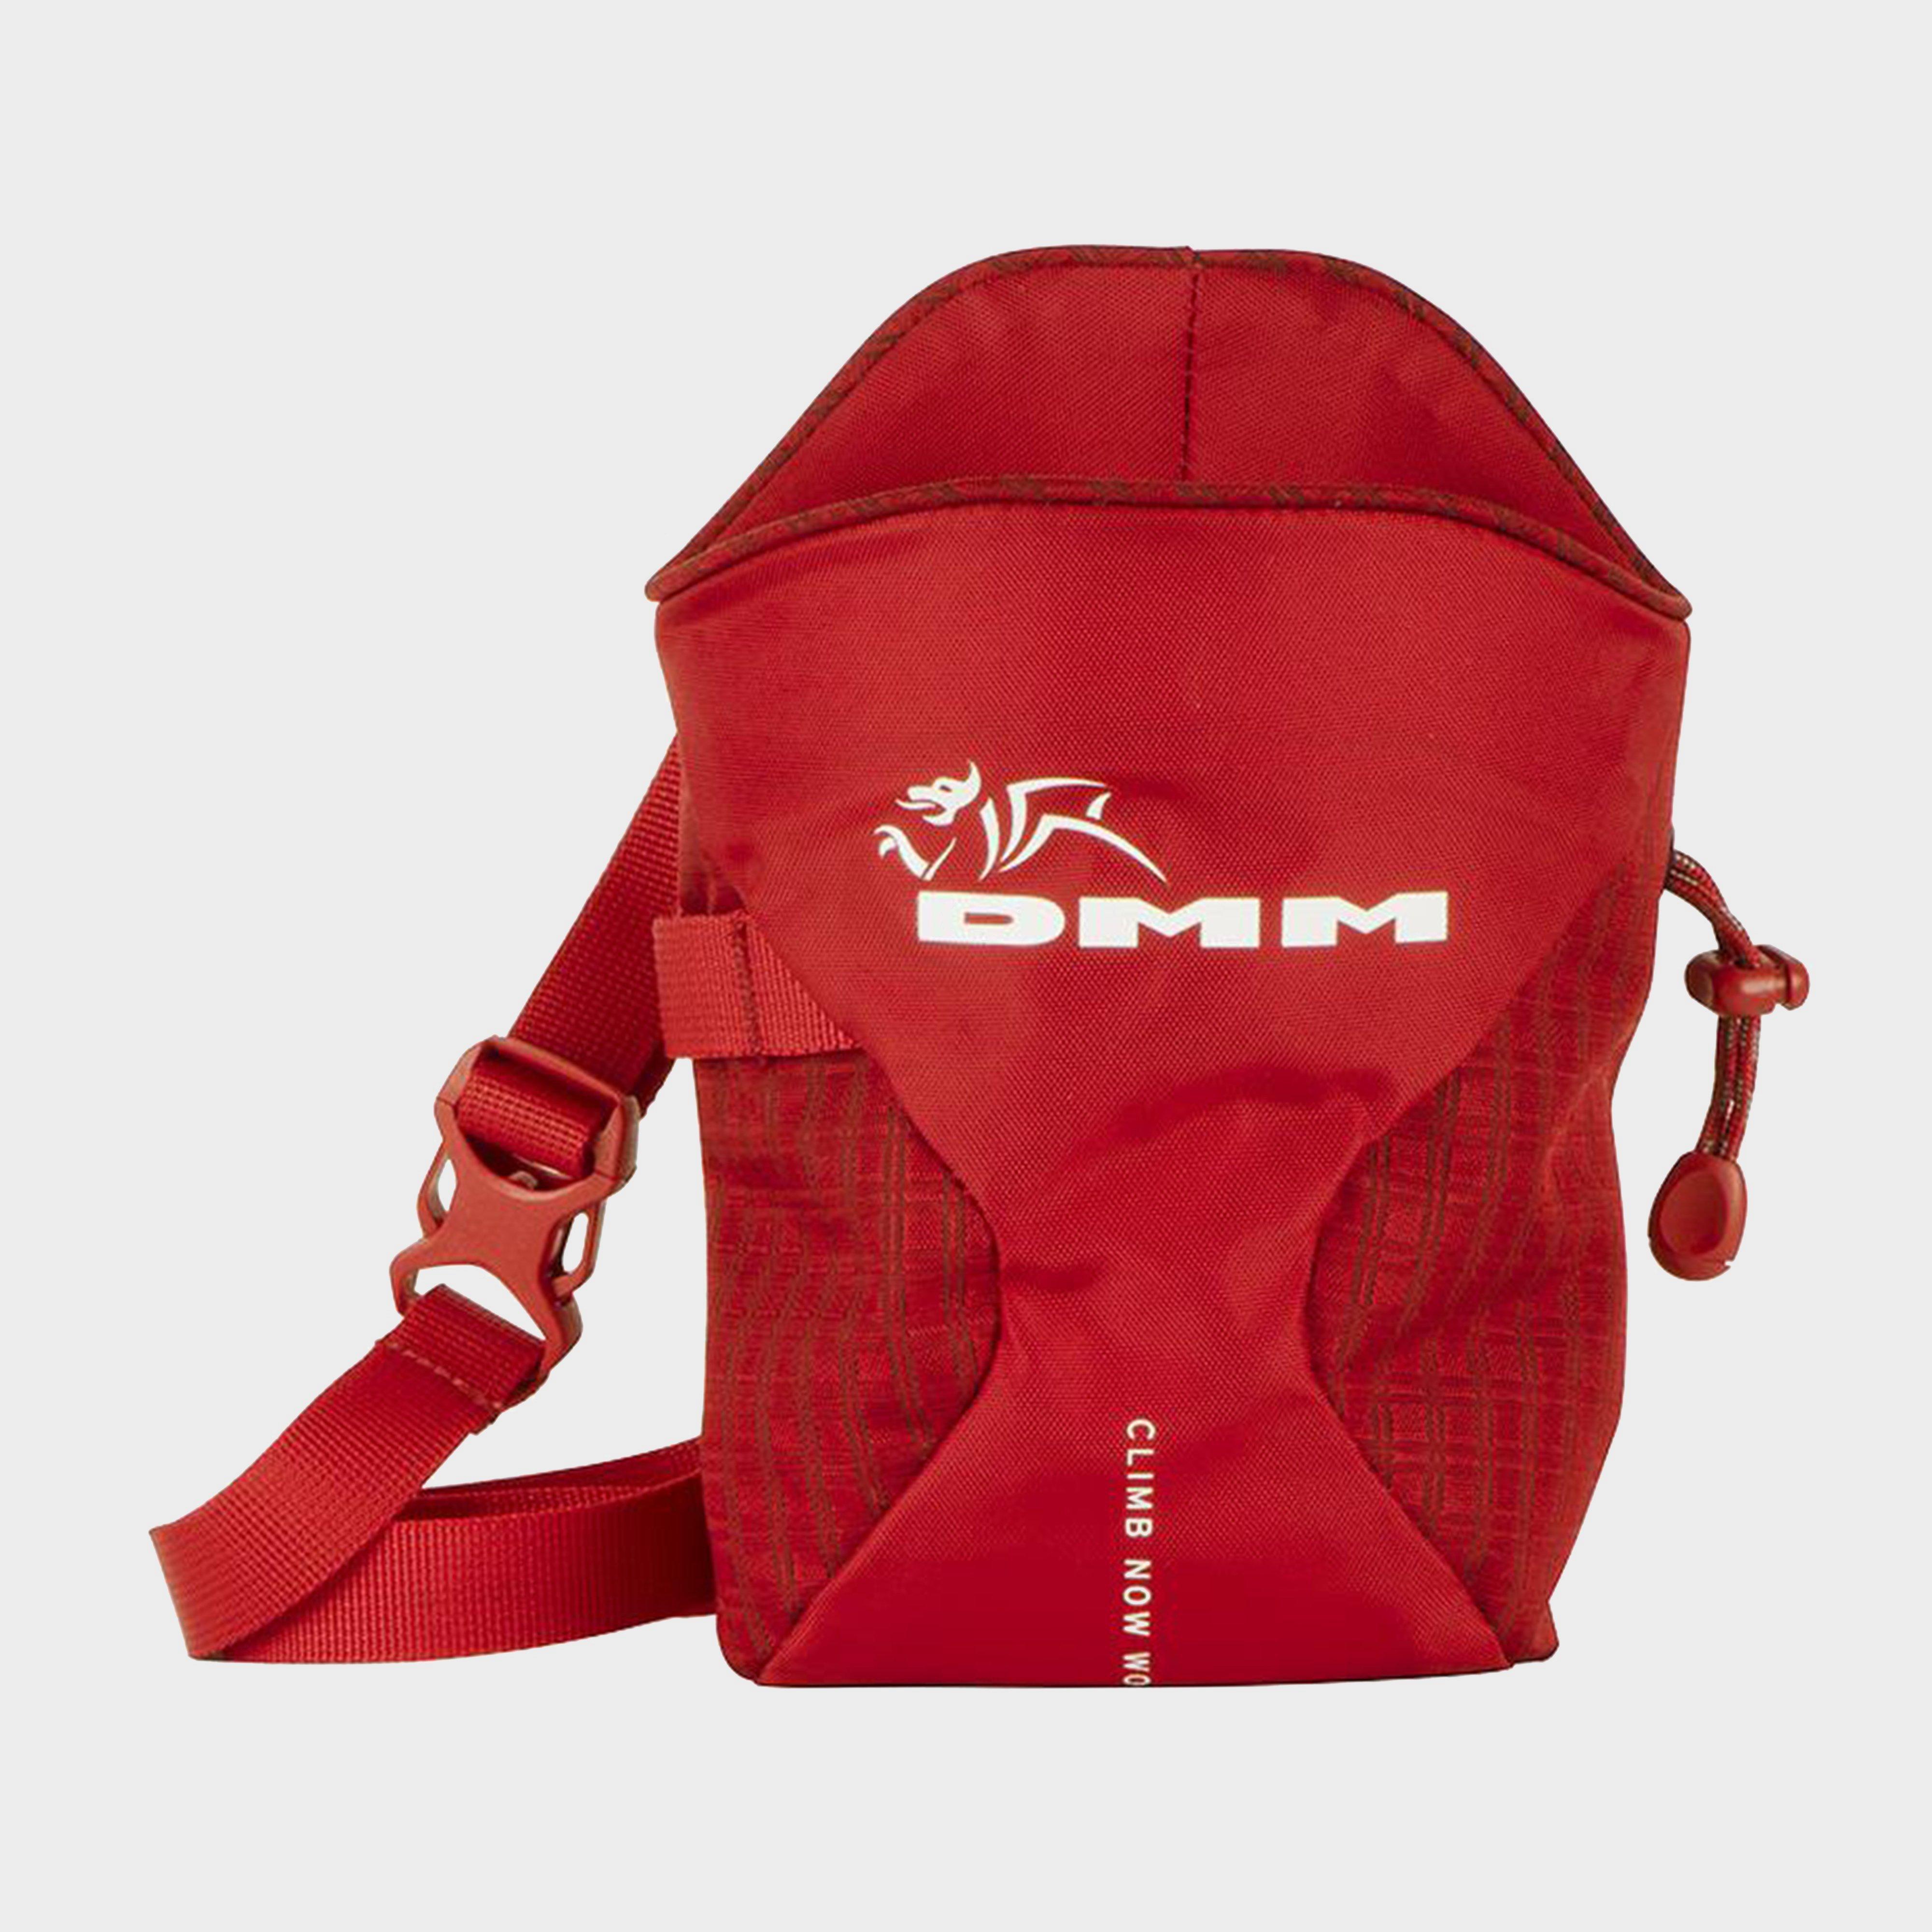 Dmm Trad Chalk Bag - Red/red  Red/red